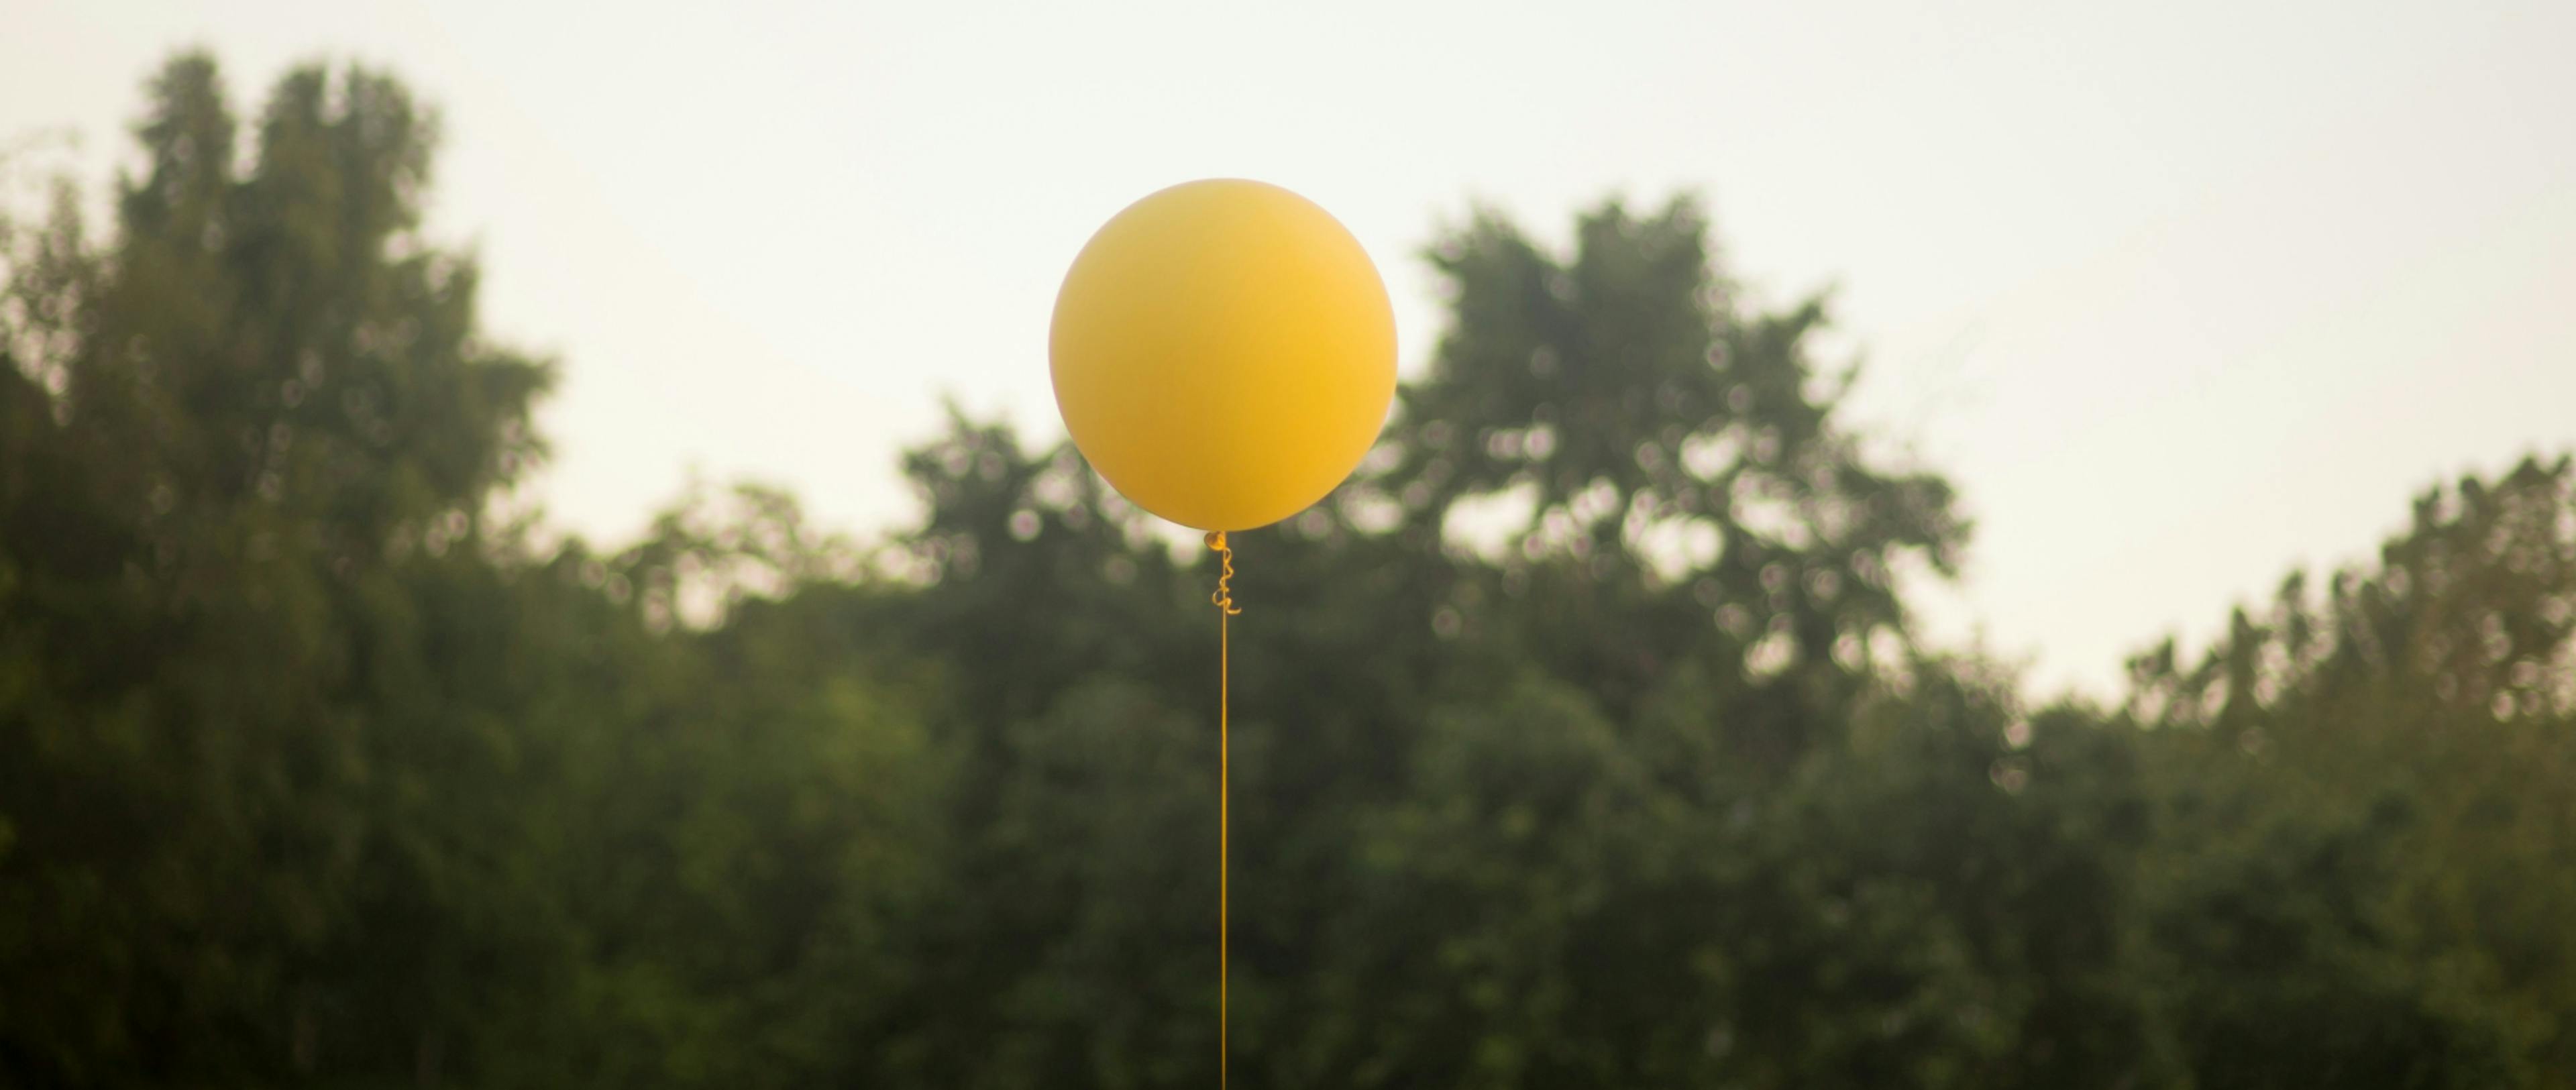 A yellow balloon floating in the air.